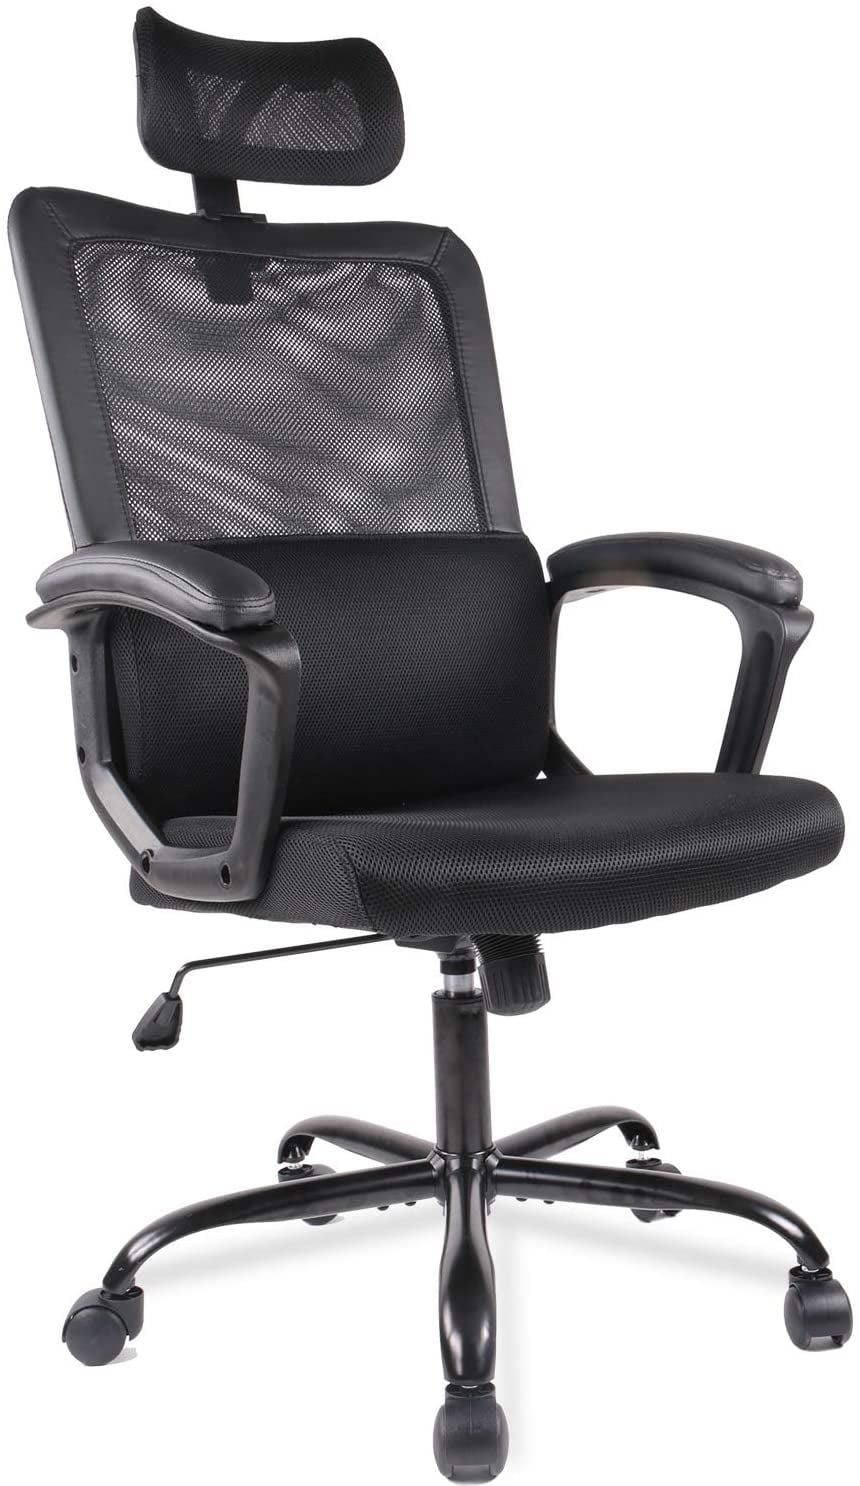 Ultimate Guide to Office Chairs for Back Pain + (Reviews 2020)